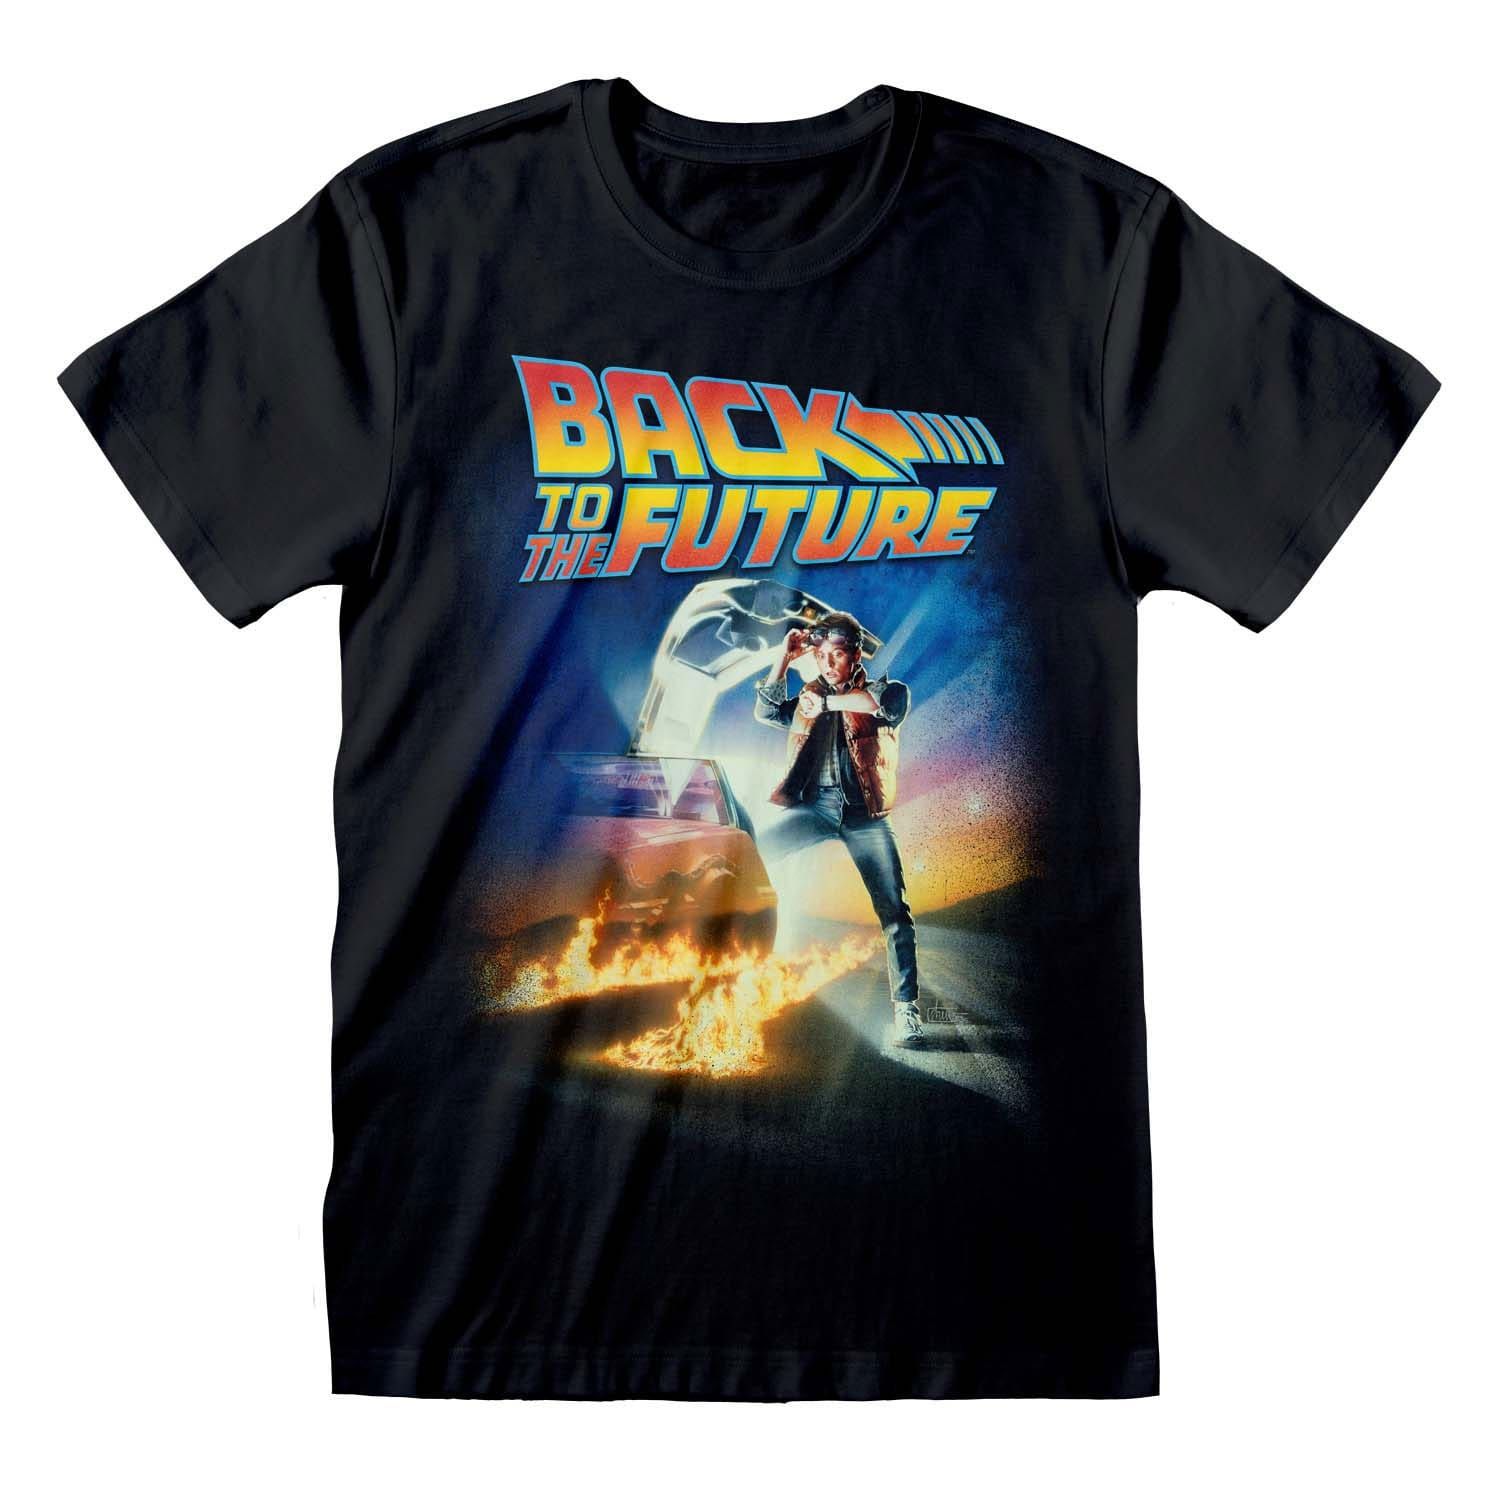 Back to the Future T-Shirt Poster Size S Heroes Inc